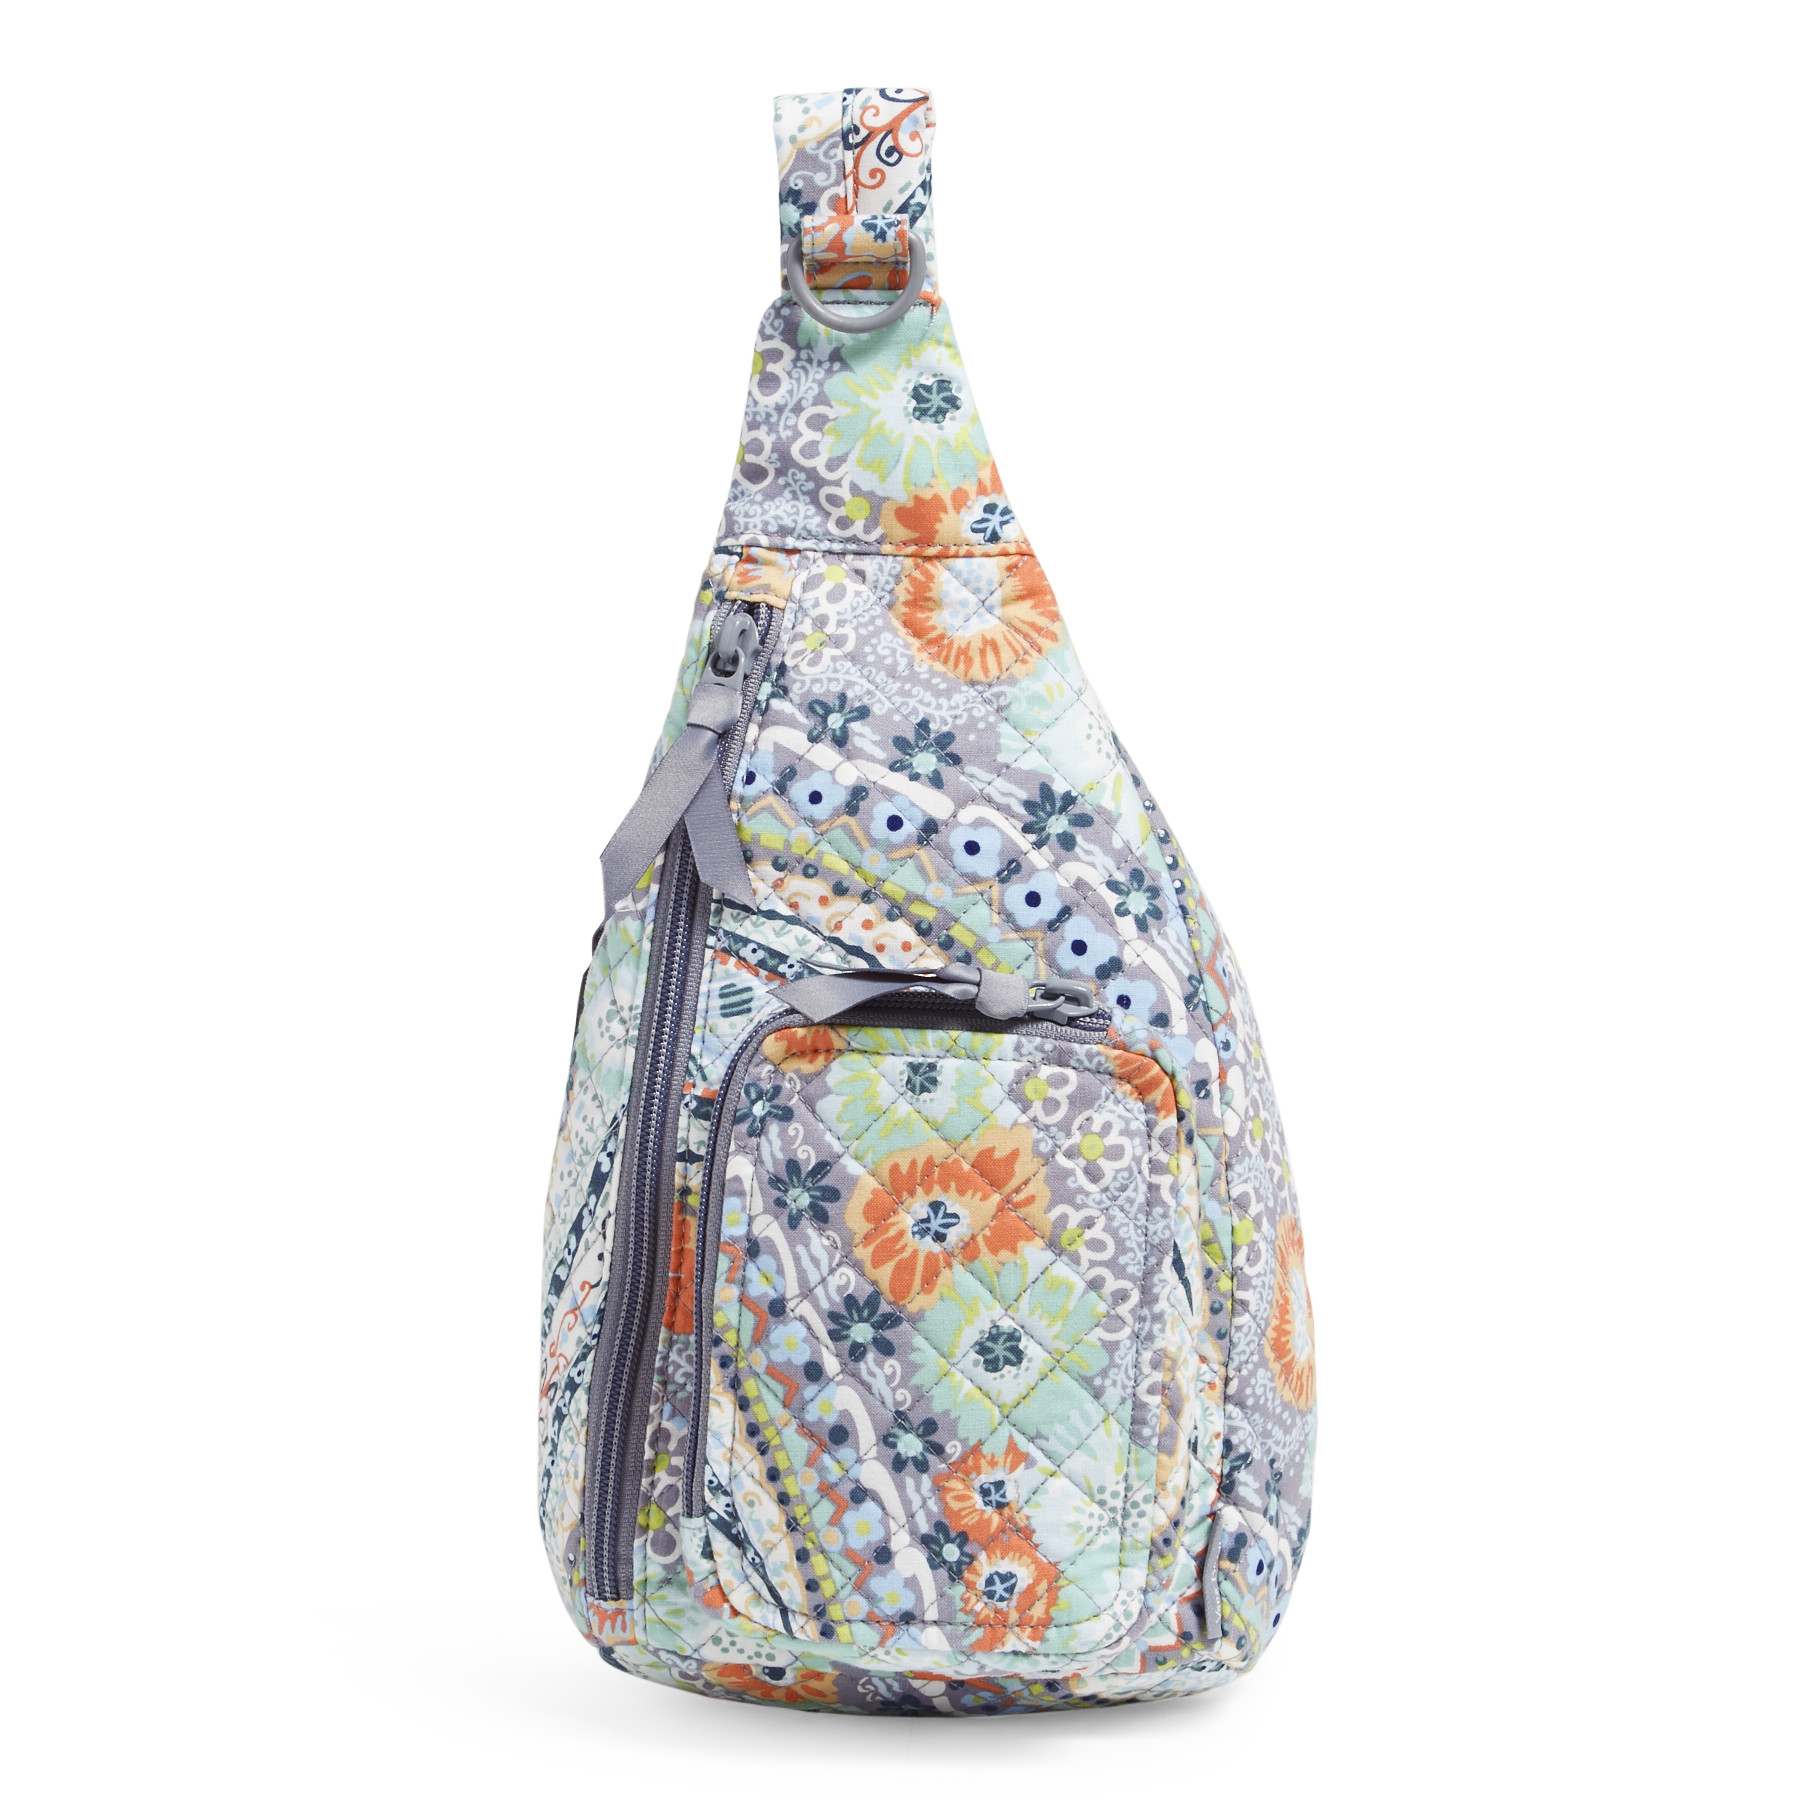 Vera Bradley Women's Recycled Cotton Mini Sling Backpack Citrus Paisley - image 1 of 8